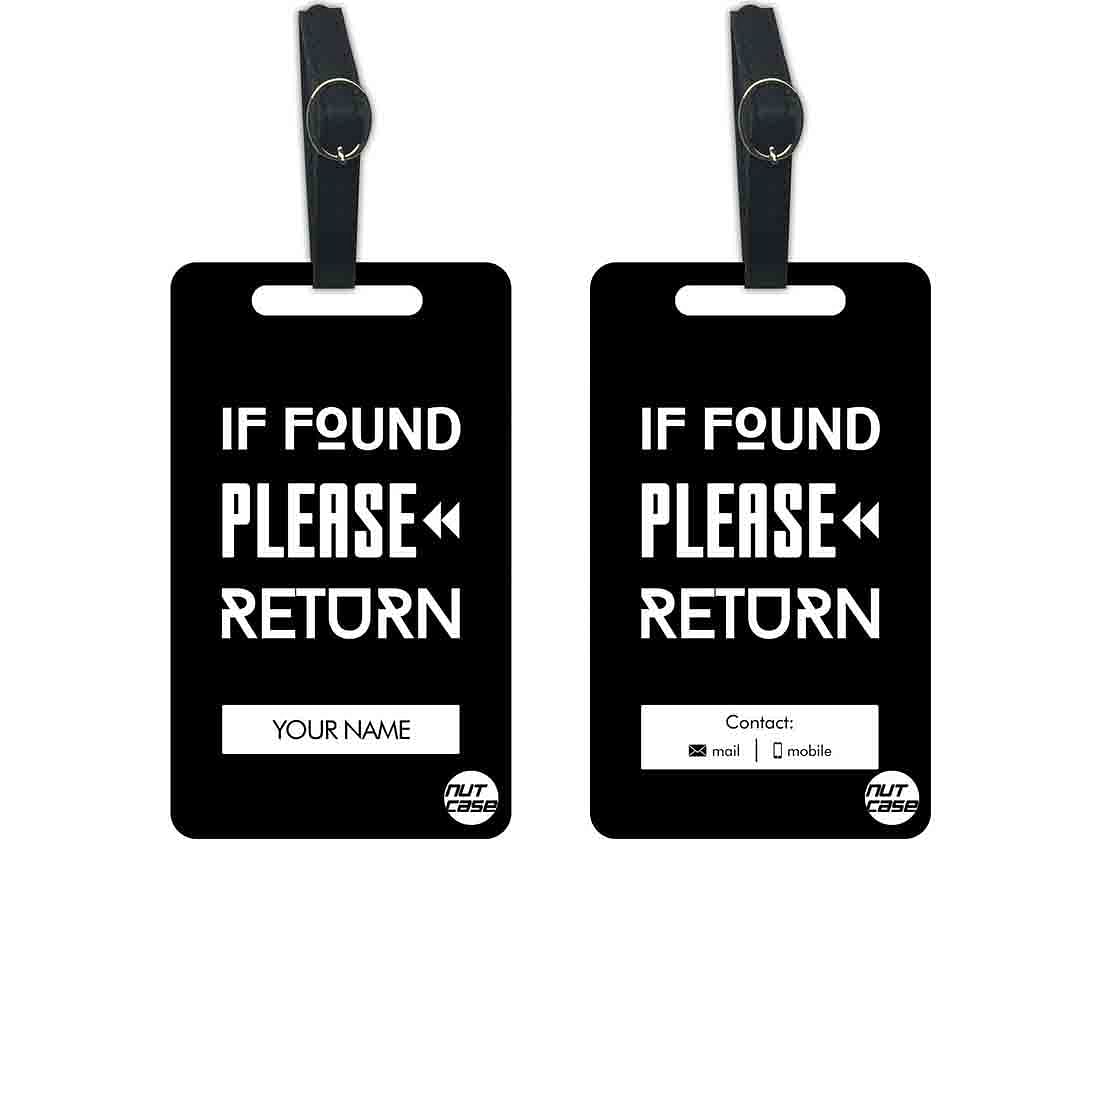 Custom-Made Travel Luggage Tags - Add your Name - Set of 2 Nutcase